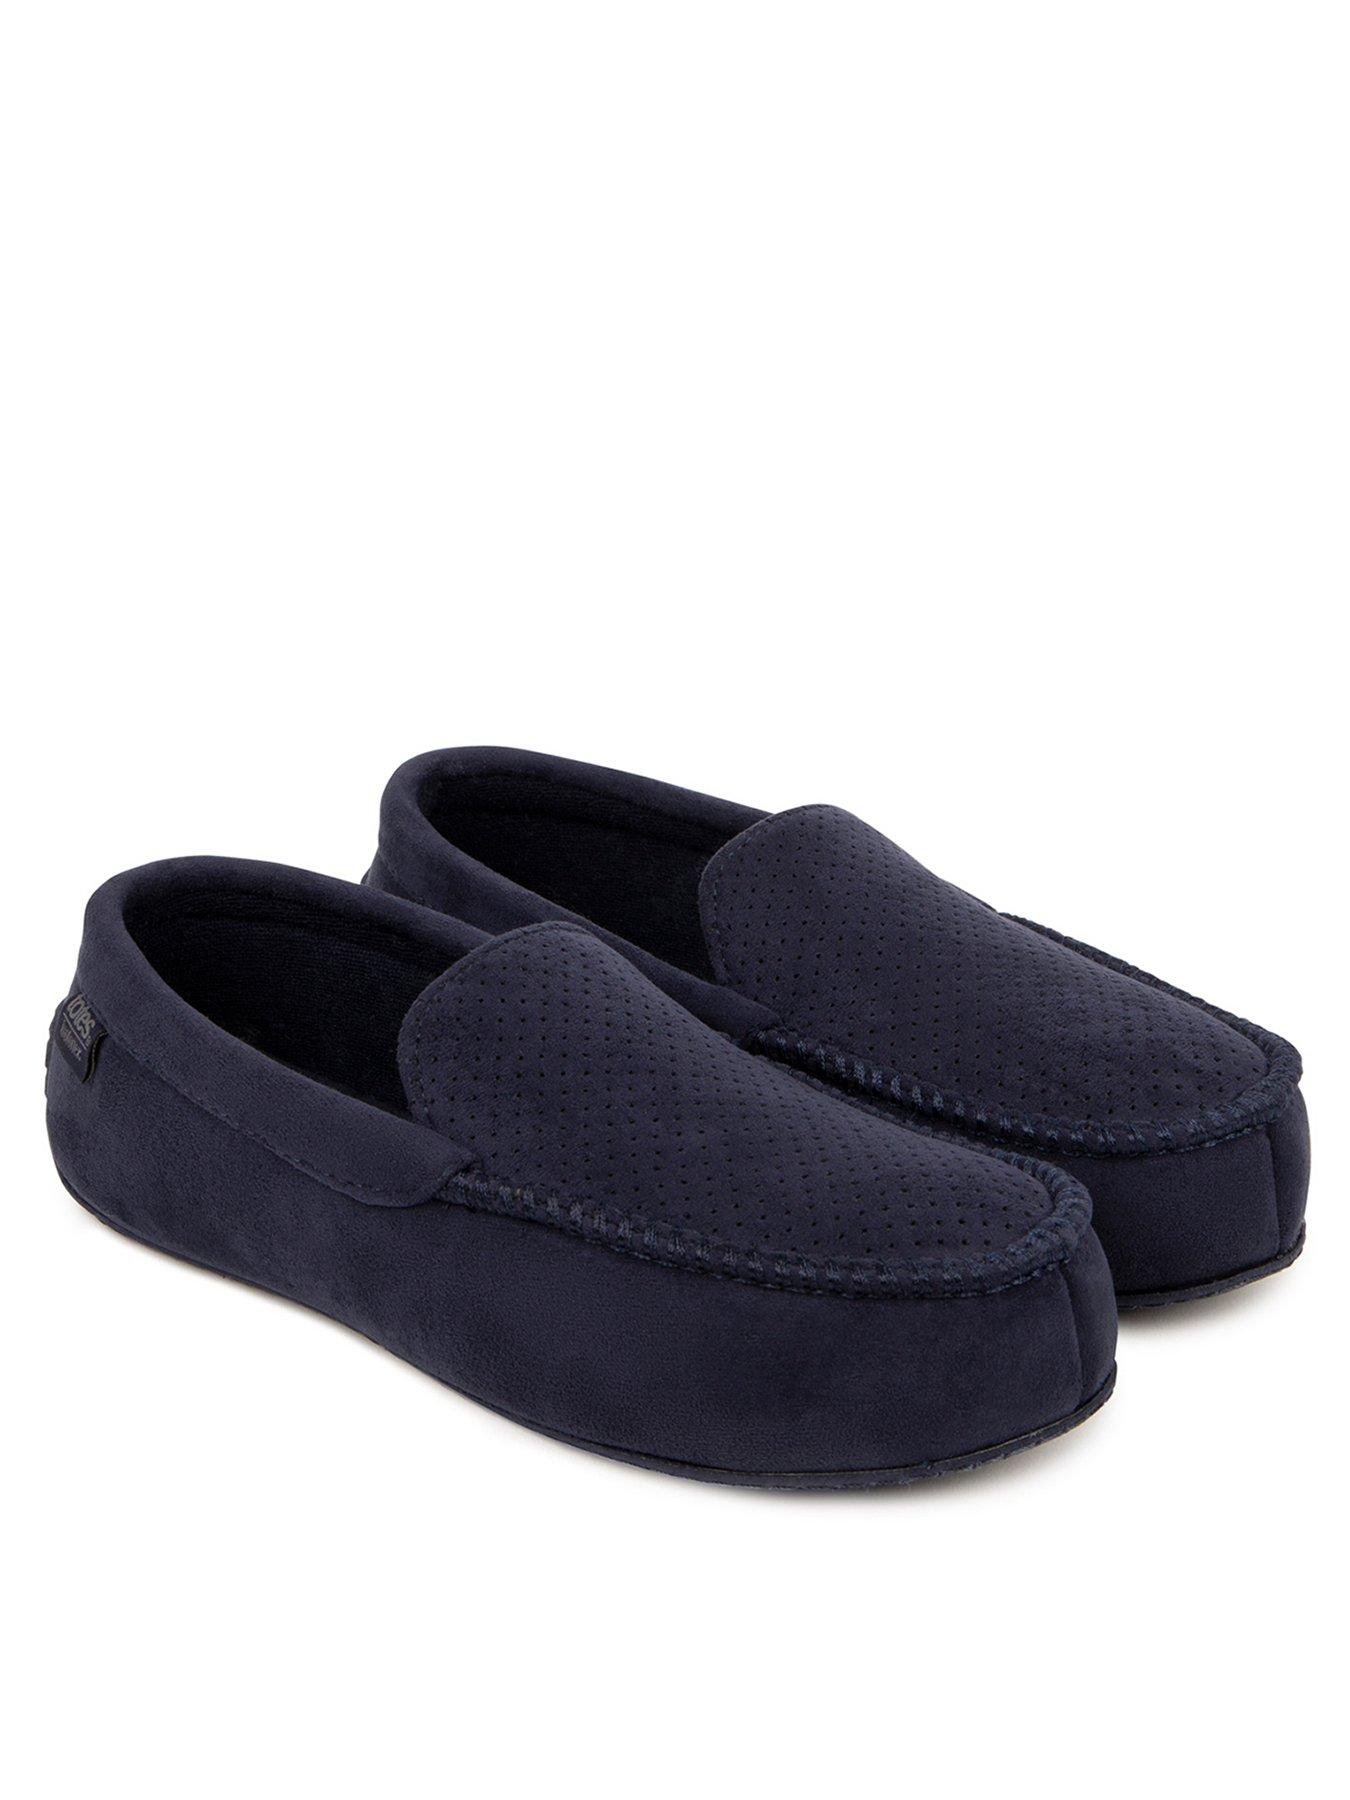 Nightwear & Loungewear Totes Airtex Suedette Moccasin With Memory Foam & Pillowstep Slipper